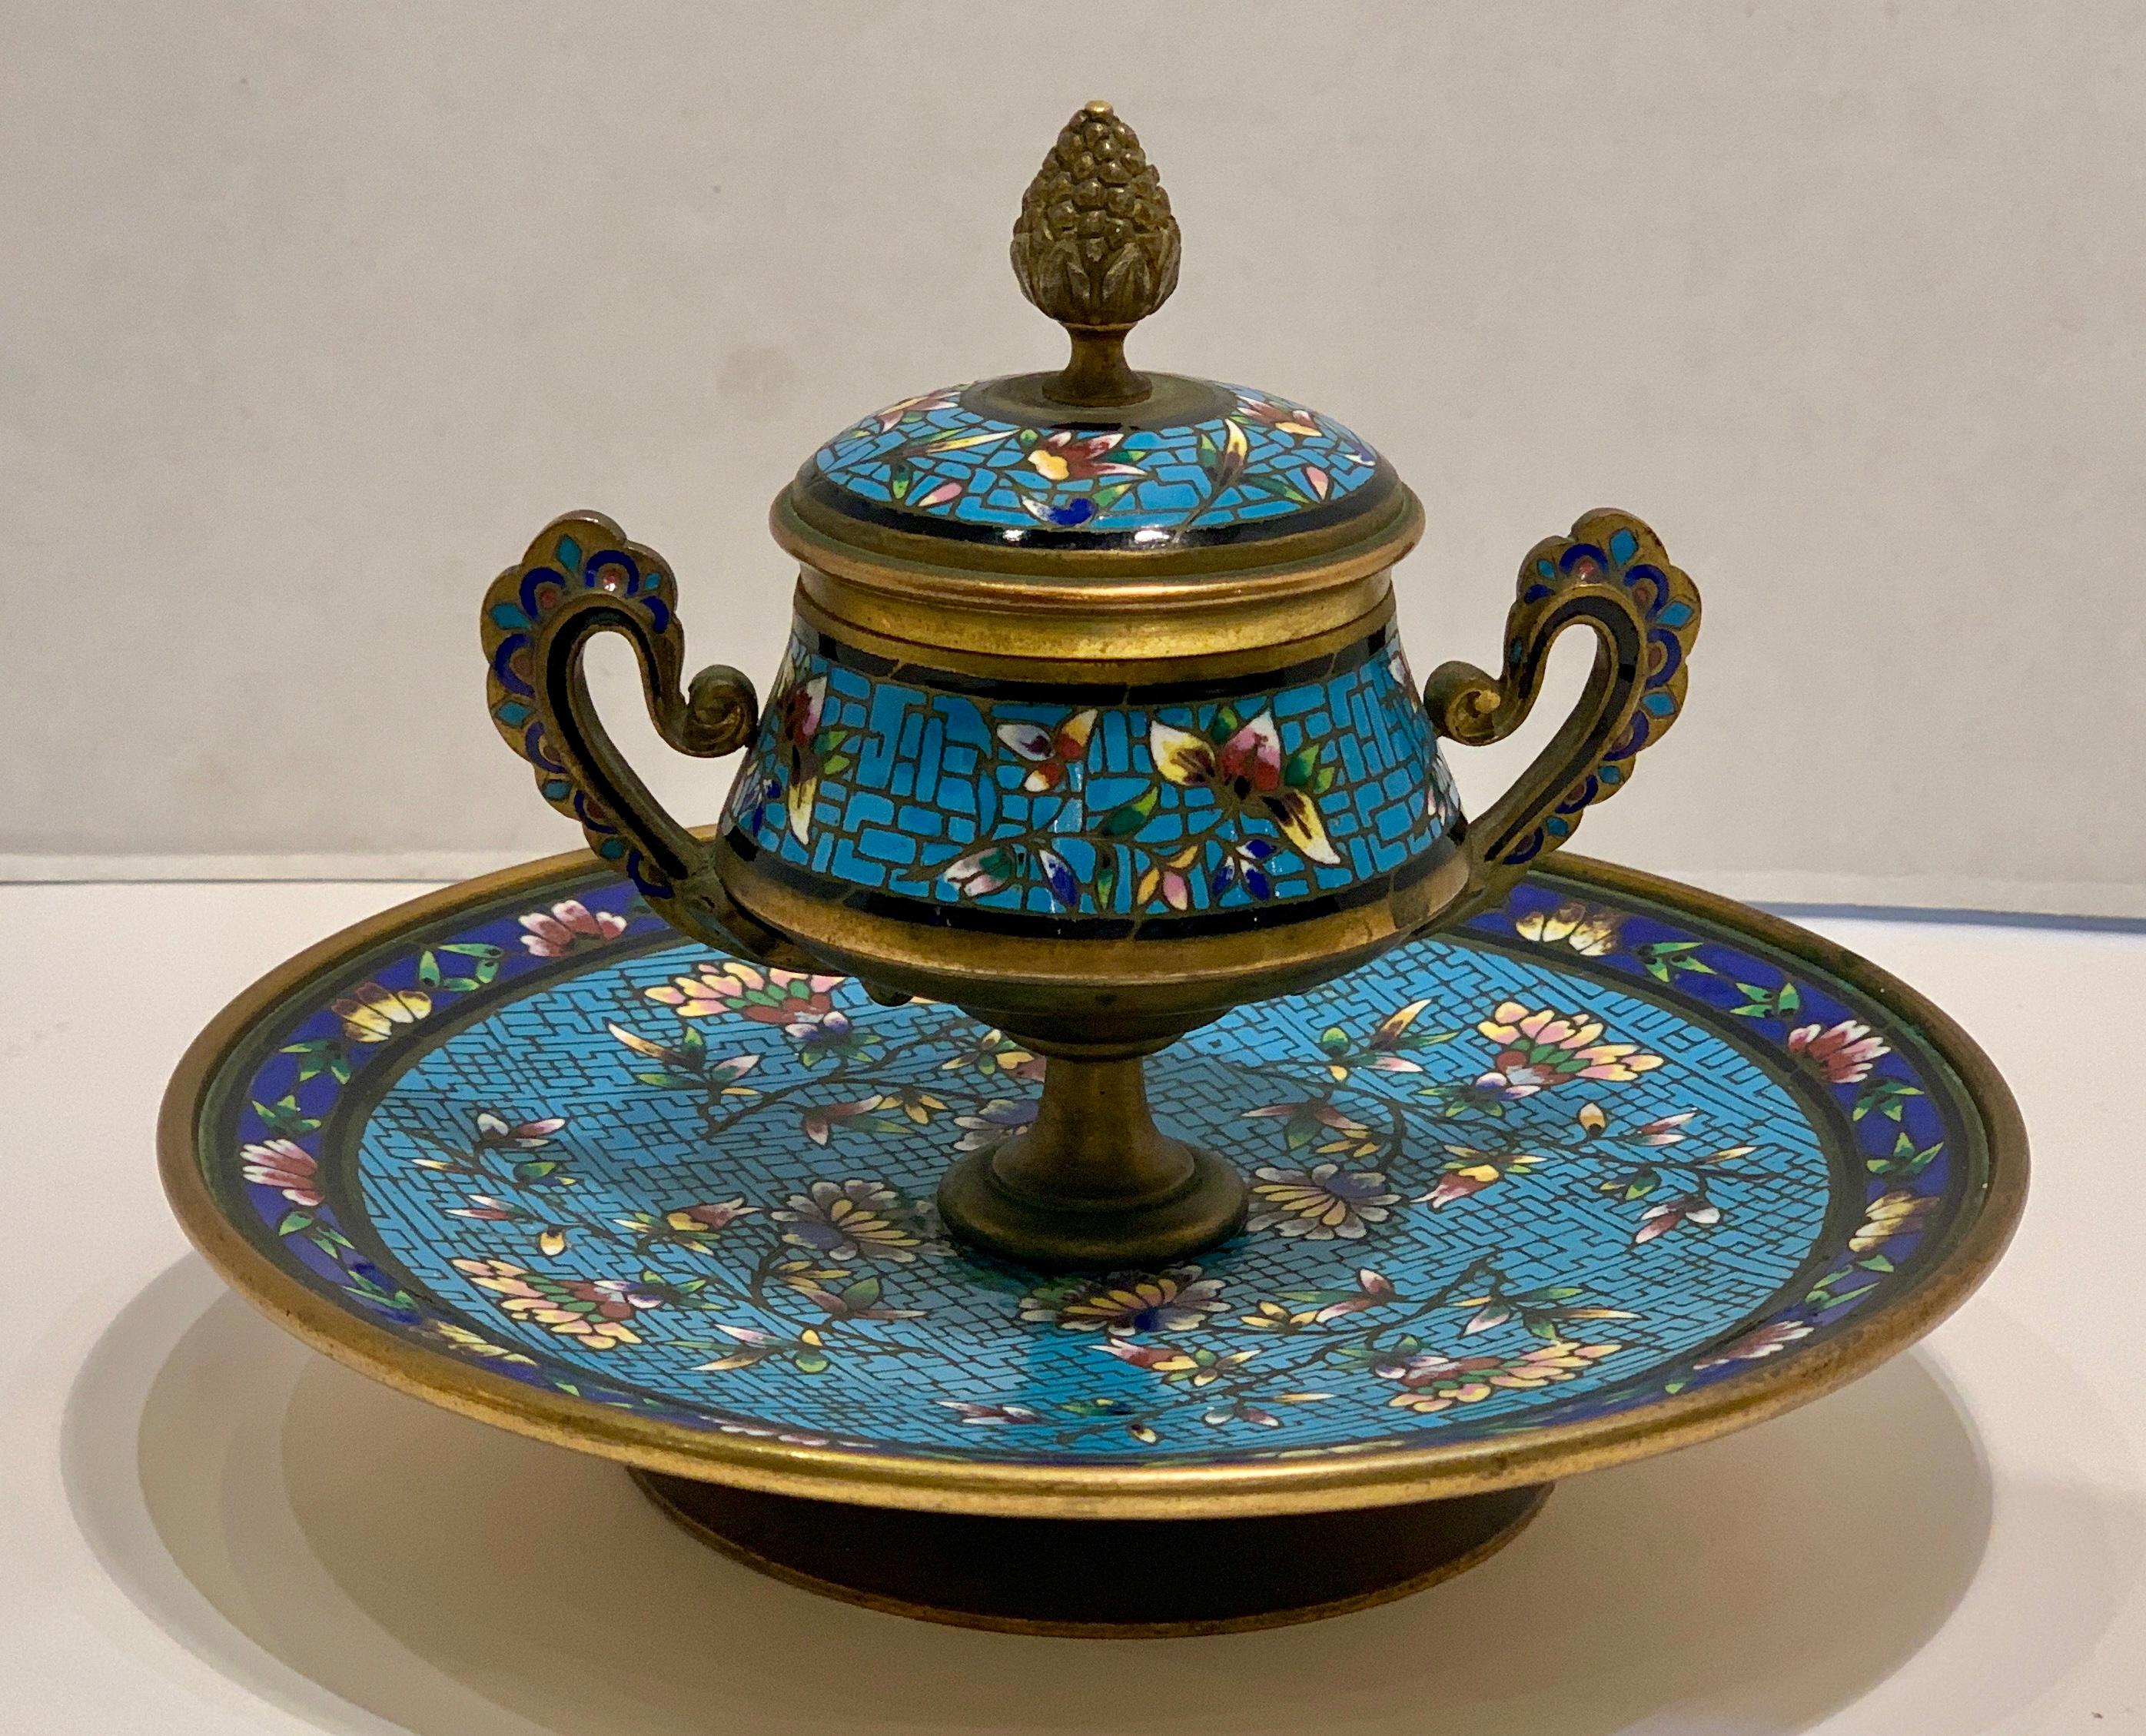 A very fine, handmade, French gilt brass and Champleve enamel antique footed encrier or inkwell features an inkpot with scalloped handles and a hinged lid with an acorn finial top. Inkwell is richly decorated in colorful, jewel toned Champleve